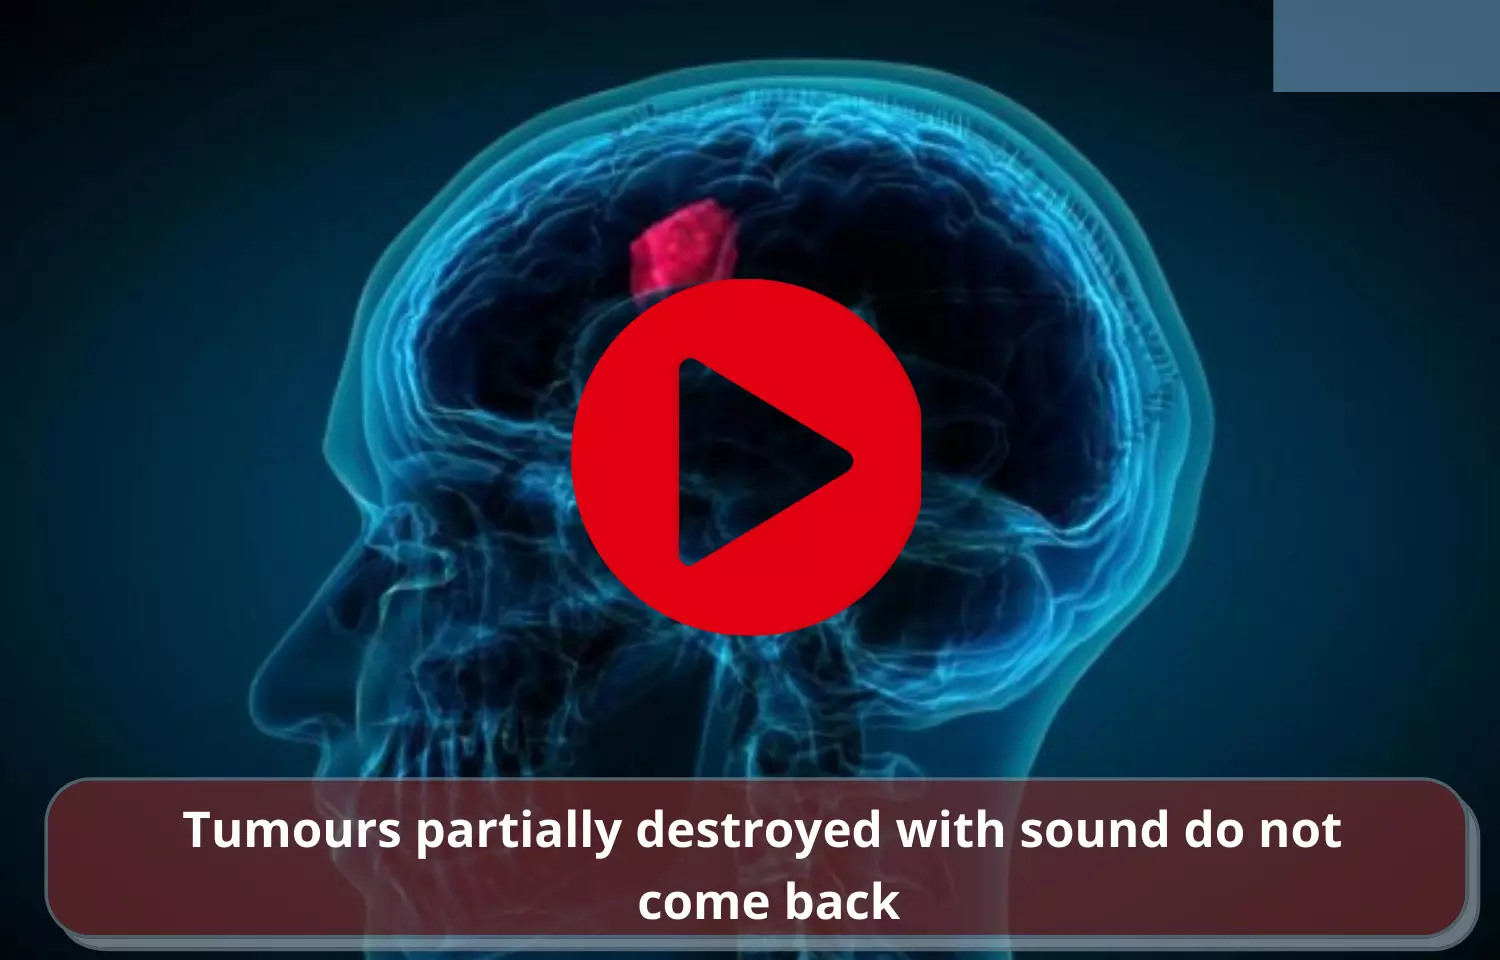 Tumours partially destroyed with sound do not come back